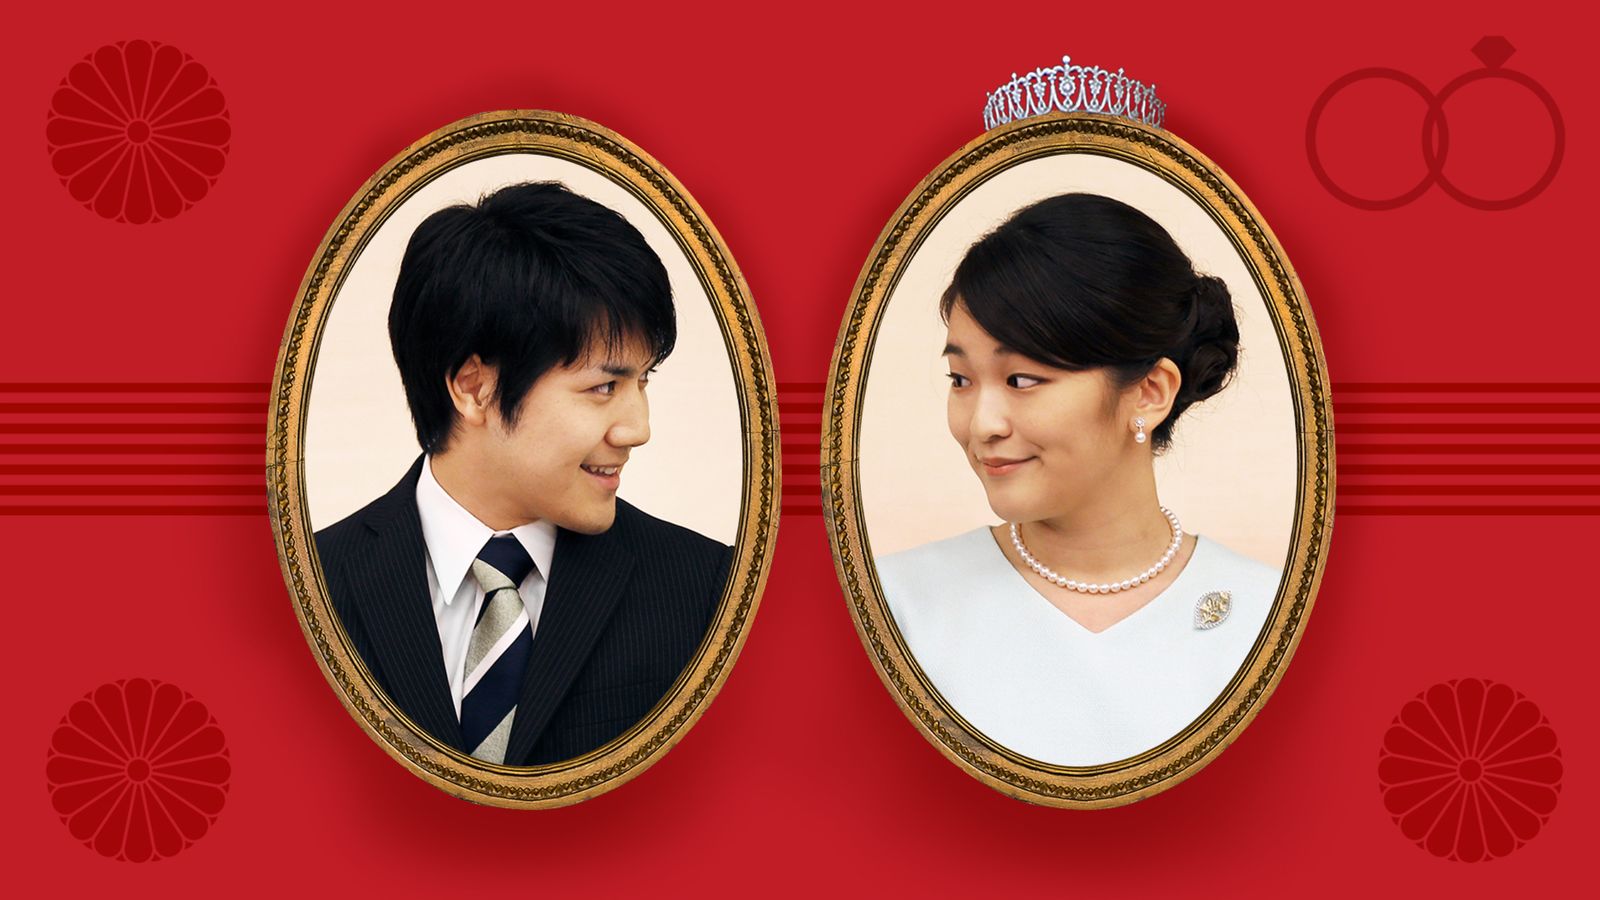 Japan's Princess Mako is going ahead with wedding to commoner Kei Komuro.  Not everyone approves | CNN